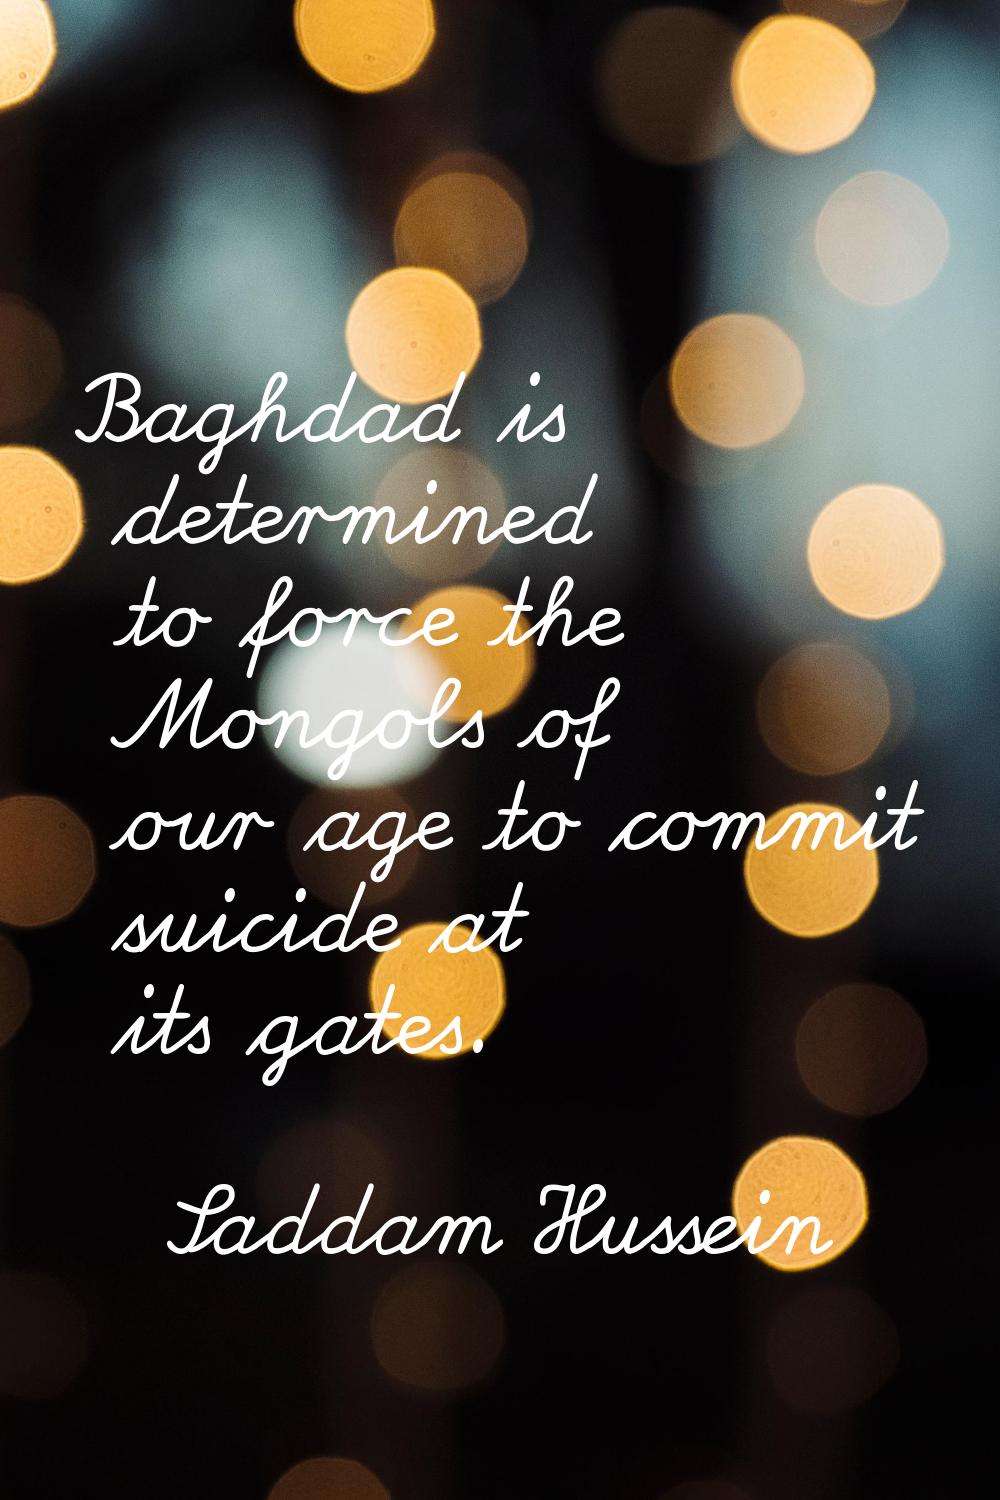 Baghdad is determined to force the Mongols of our age to commit suicide at its gates.